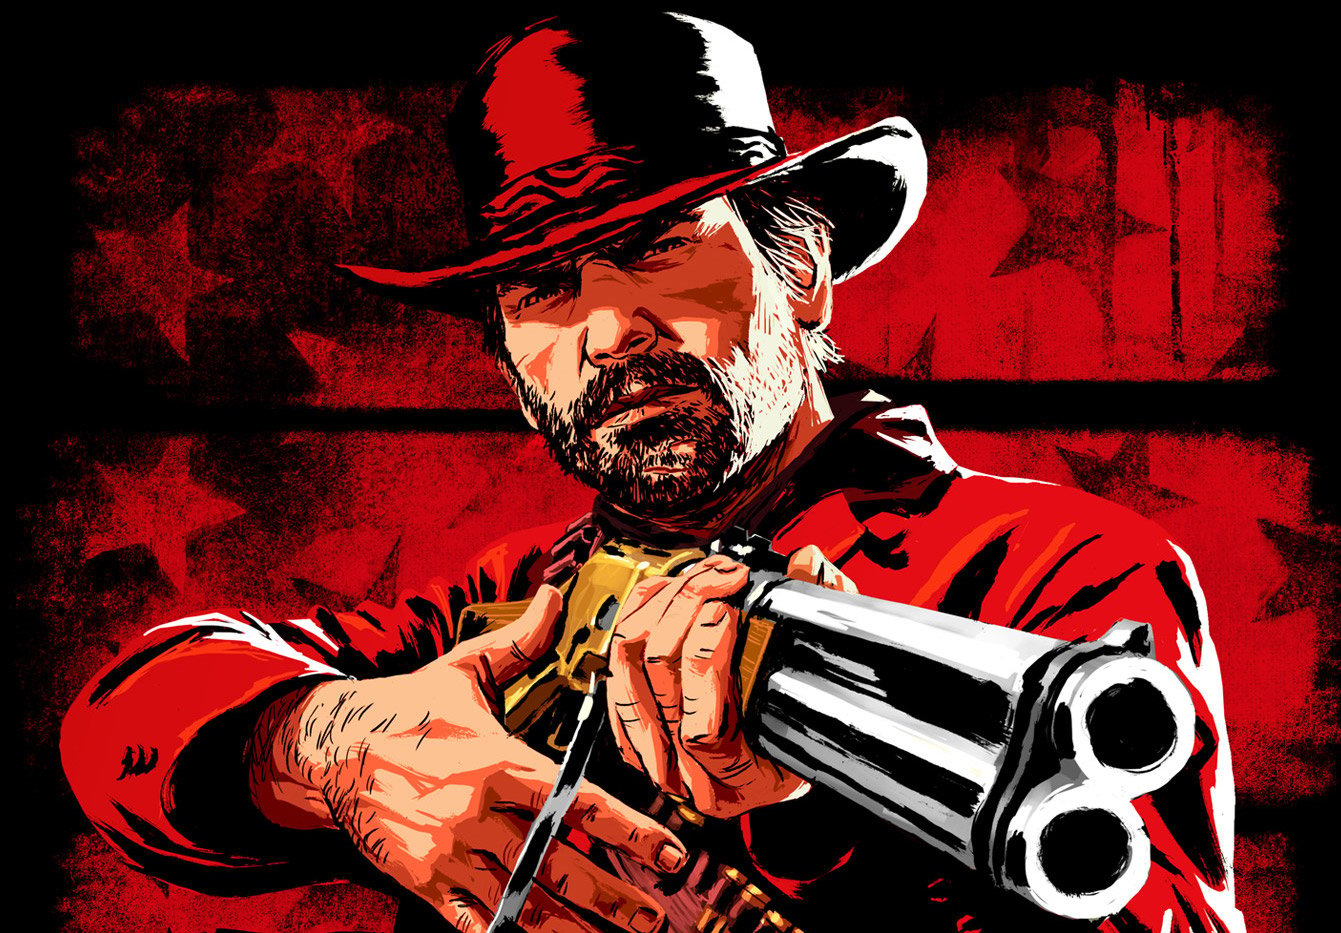 Red Dead Redemption 2 Update 1.24 Is Out, Here Are The Patch Notes